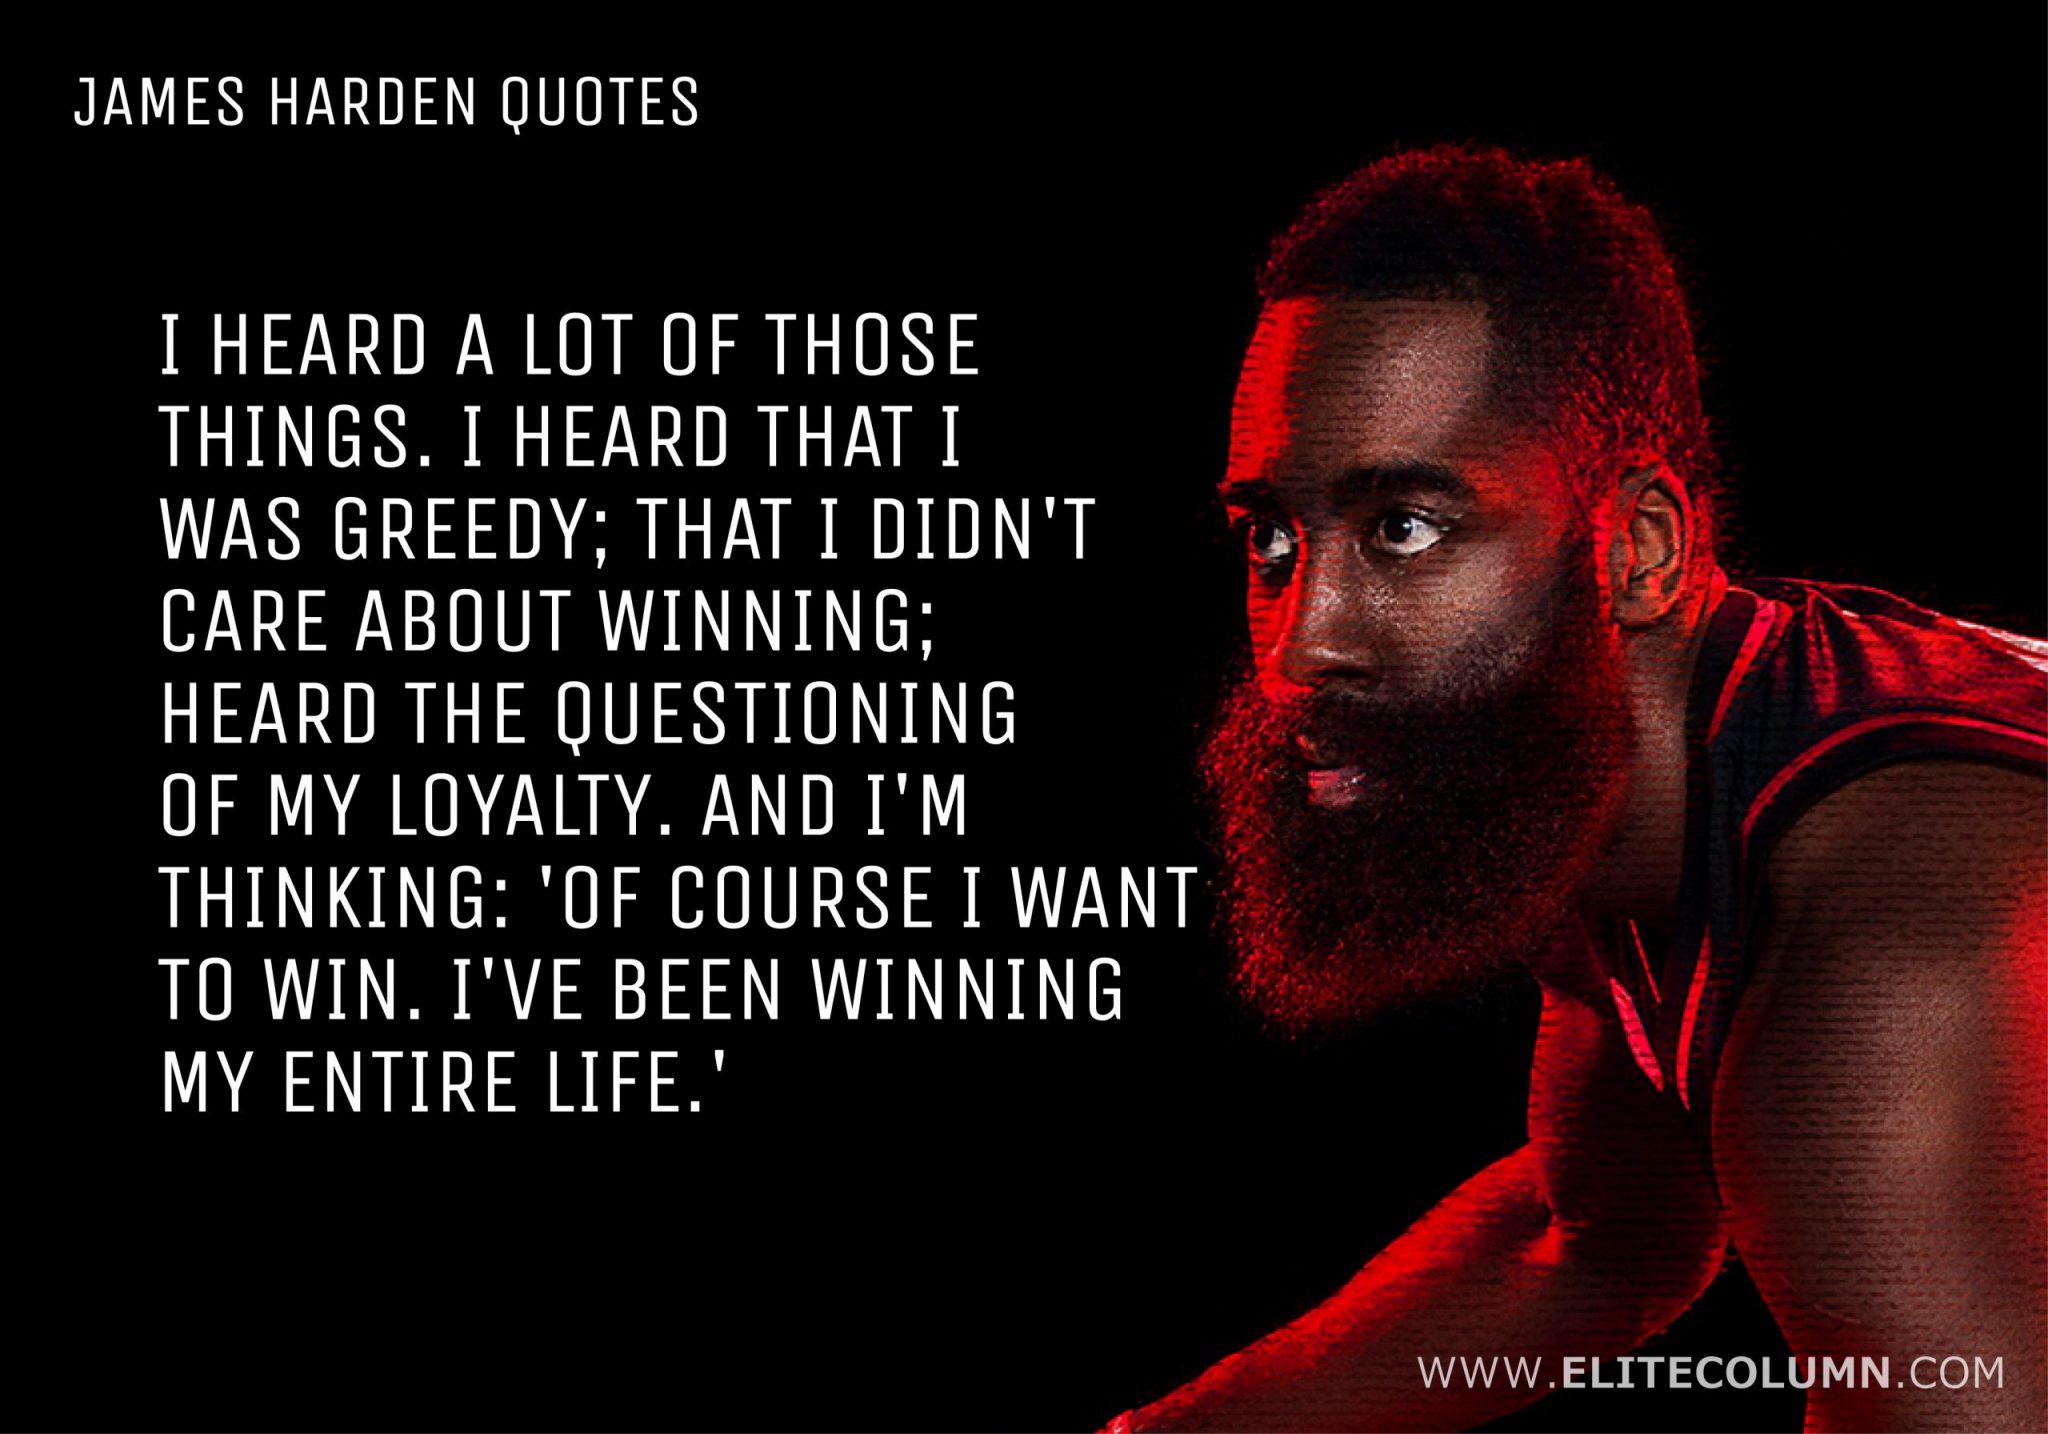 James Harden Quotes (11)